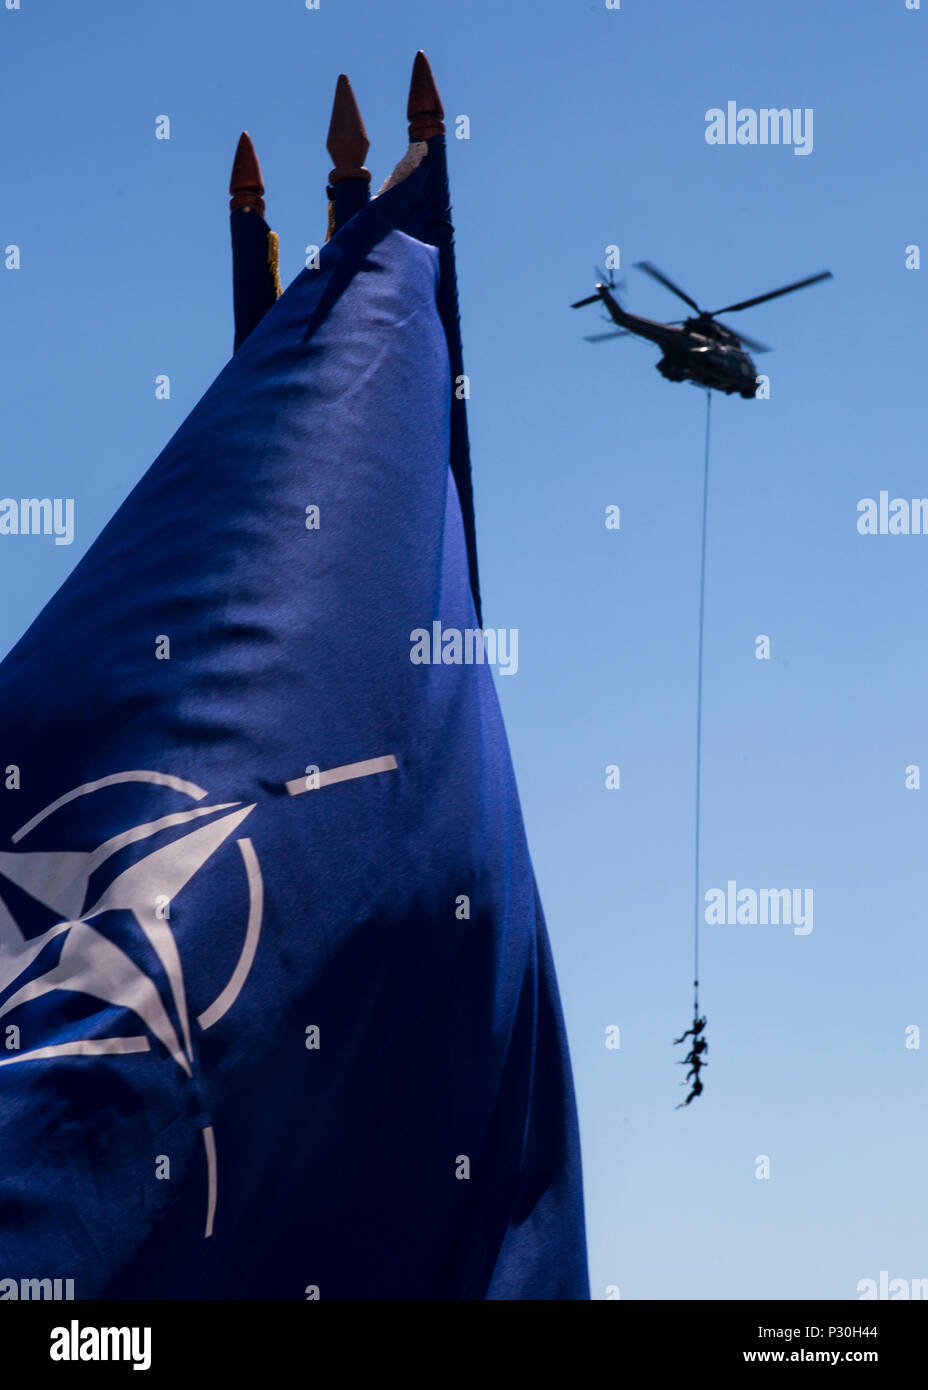 Three Romanian sailors hang suspended from a helicopter while a delighted crowd spectates during the 114th annual Navy Day celebration at the Port of Constanţa, Romania, Aug. 15, 2016. U.S. Sailors and Marines supporting the Black Sea Rotational Force 16.2 helped pay tribute to the prestigious history of the Romanian navy and highlighted the military’s movement toward new developments and modernizations. Black Sea Rotational Force is an annual multilateral security cooperation activity between the U.S. Marine Corps and partner nations in the Black Sea, Balkan and Caucasus regions designed to e Stock Photo